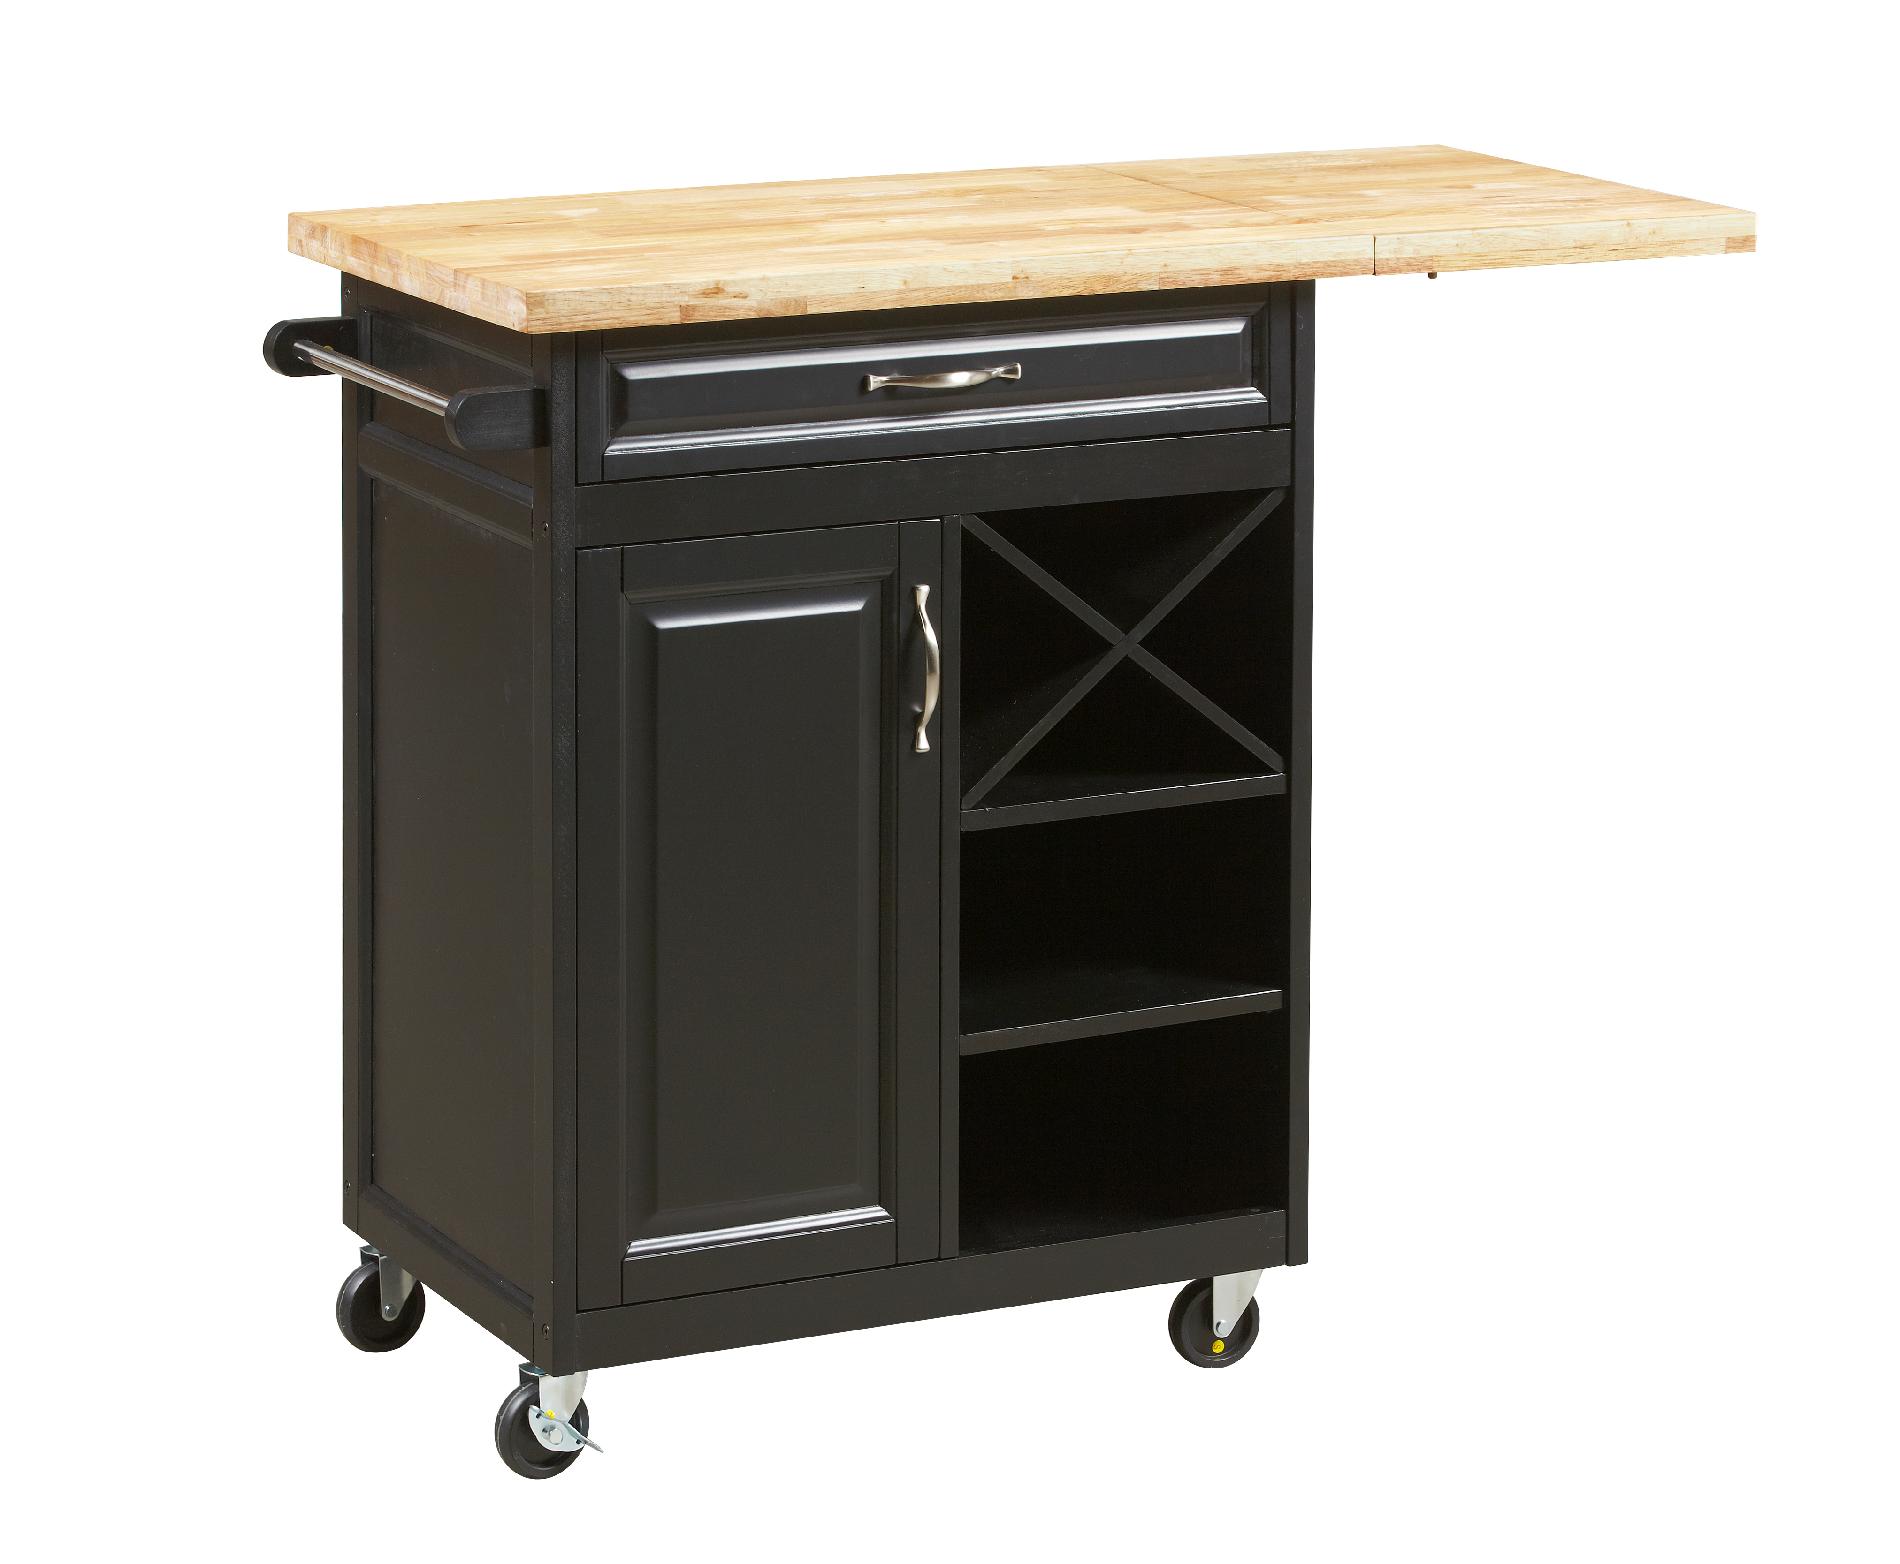 1-Drawer Kitchen Cart with Large Worktop in Black